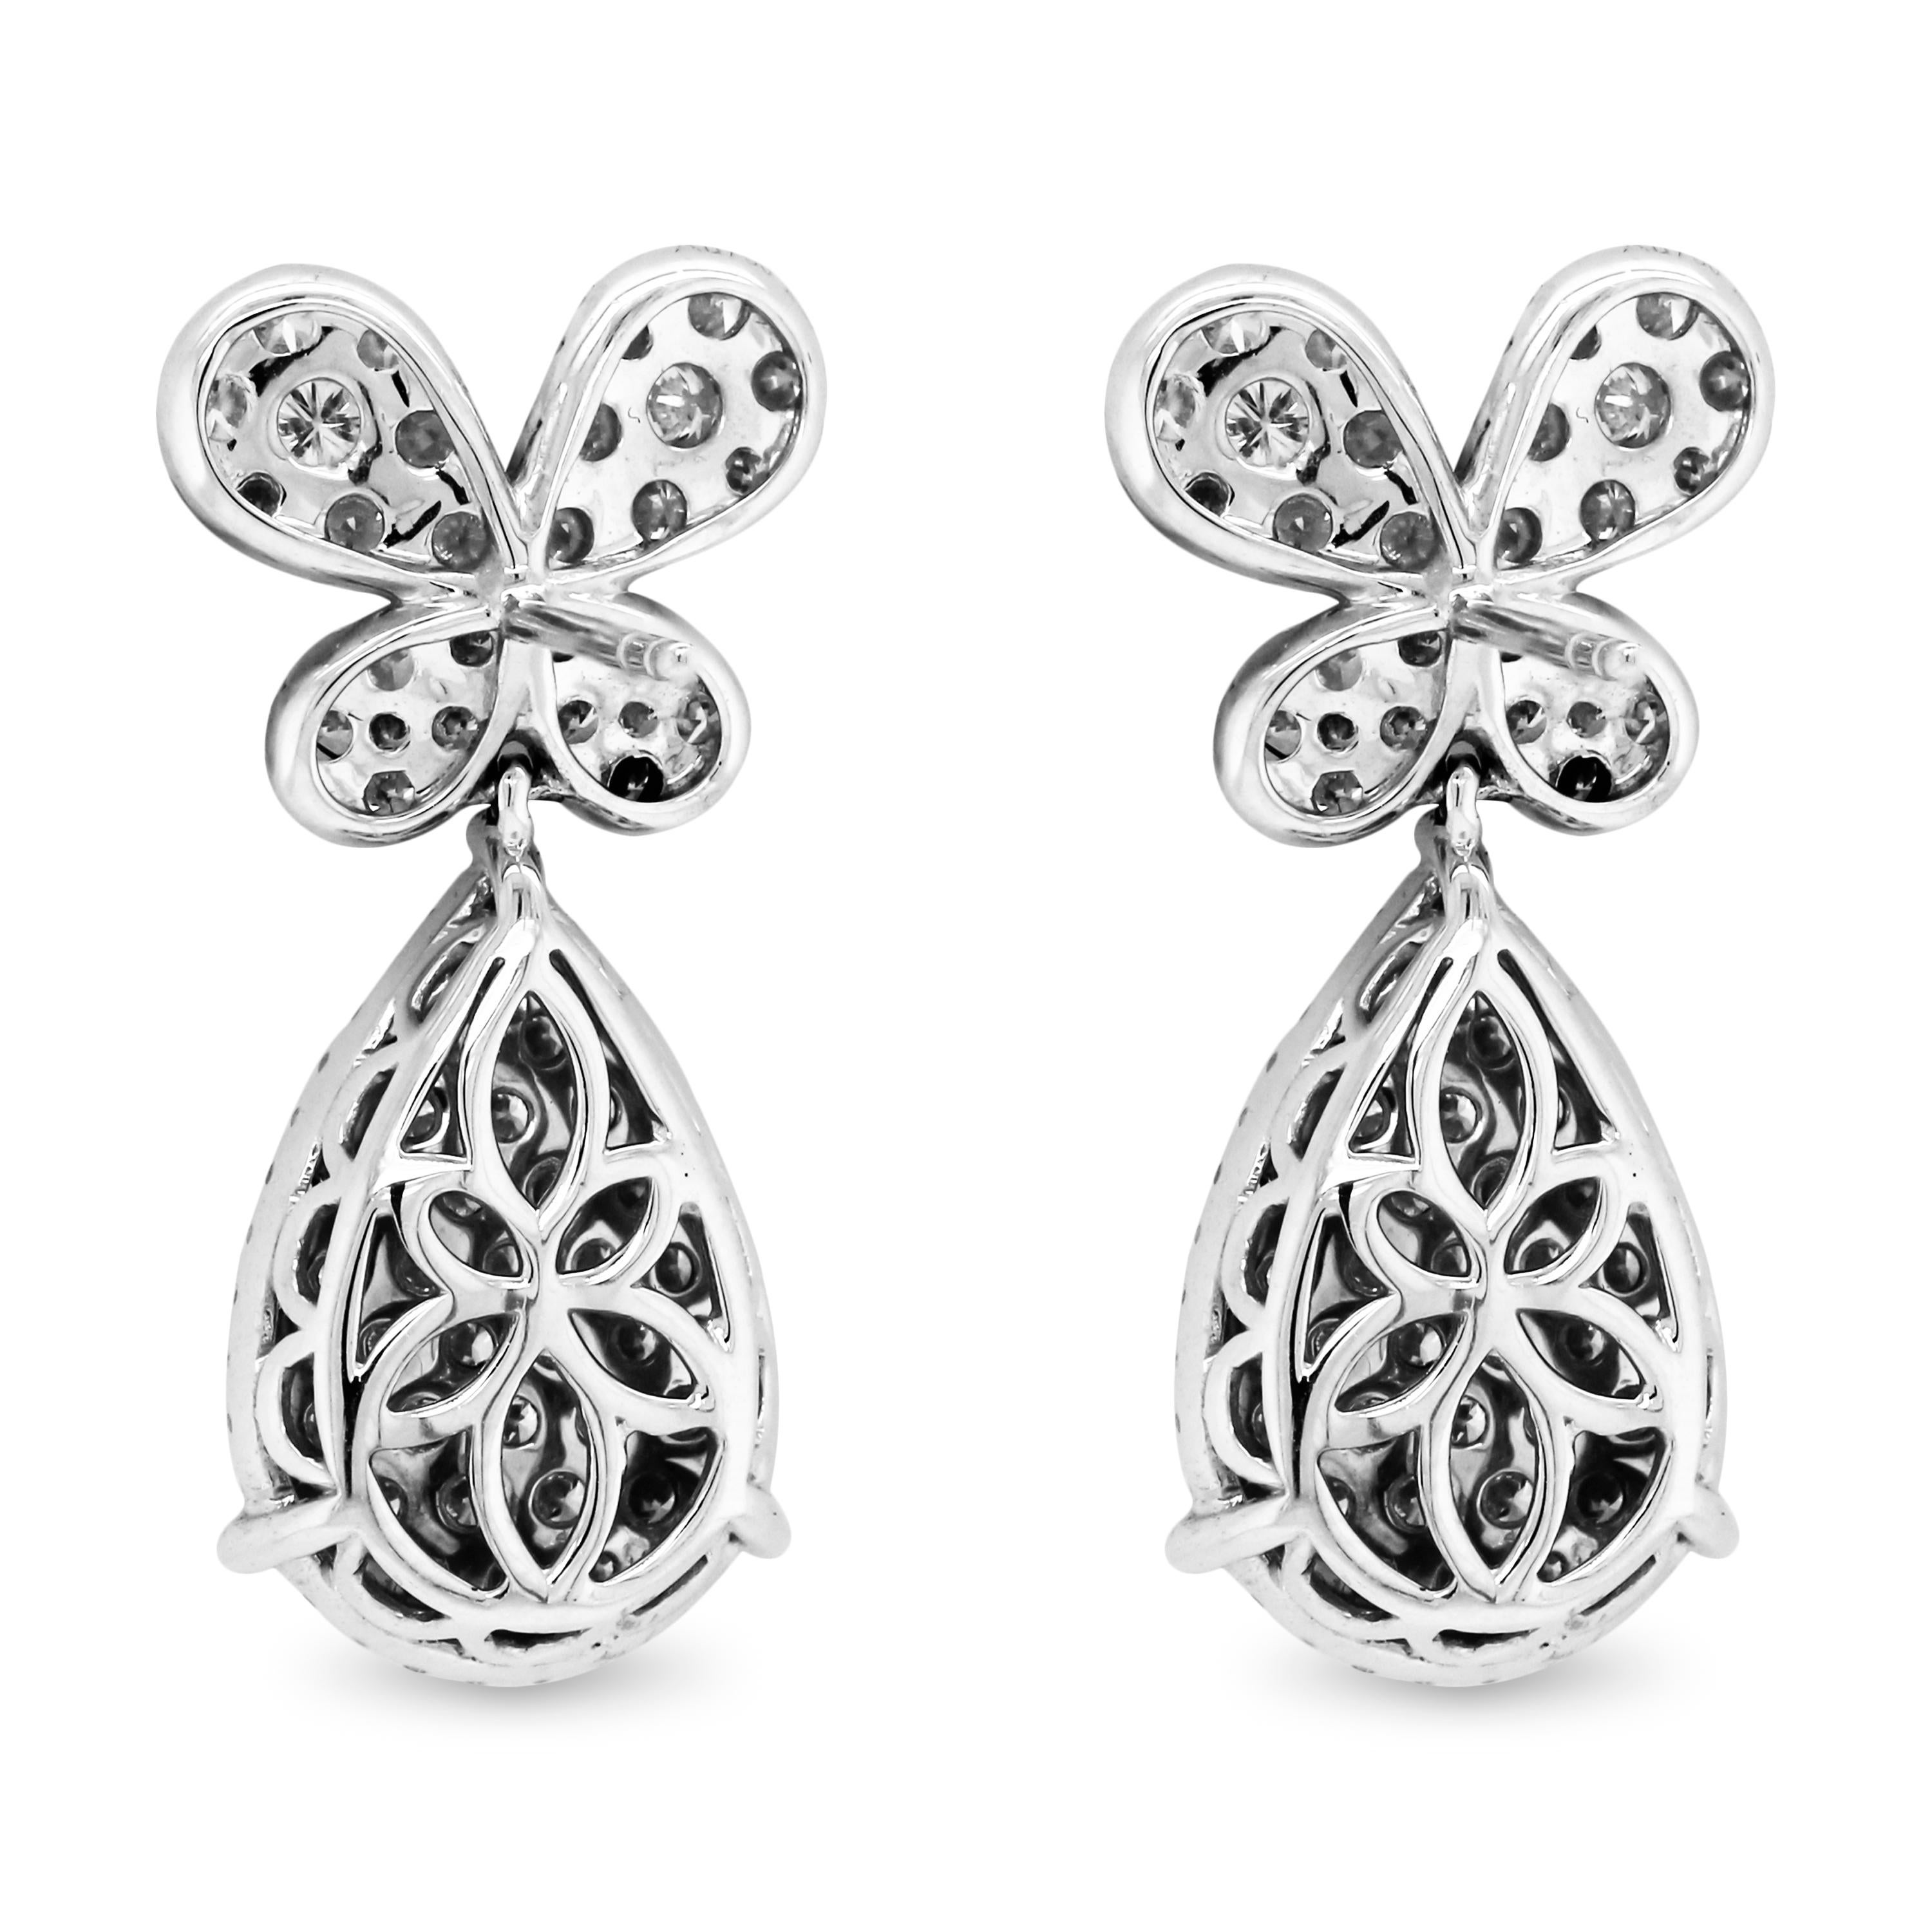 18K White Gold Diamond Butterfly and Pear Shape Design Drop Earrings

A unique pair of earrings featuring butterfly tops with a diamond pear shape design drop.

3.40 carat G color, VS clarity diamonds total weight

Earrings are 1.13 inch length by